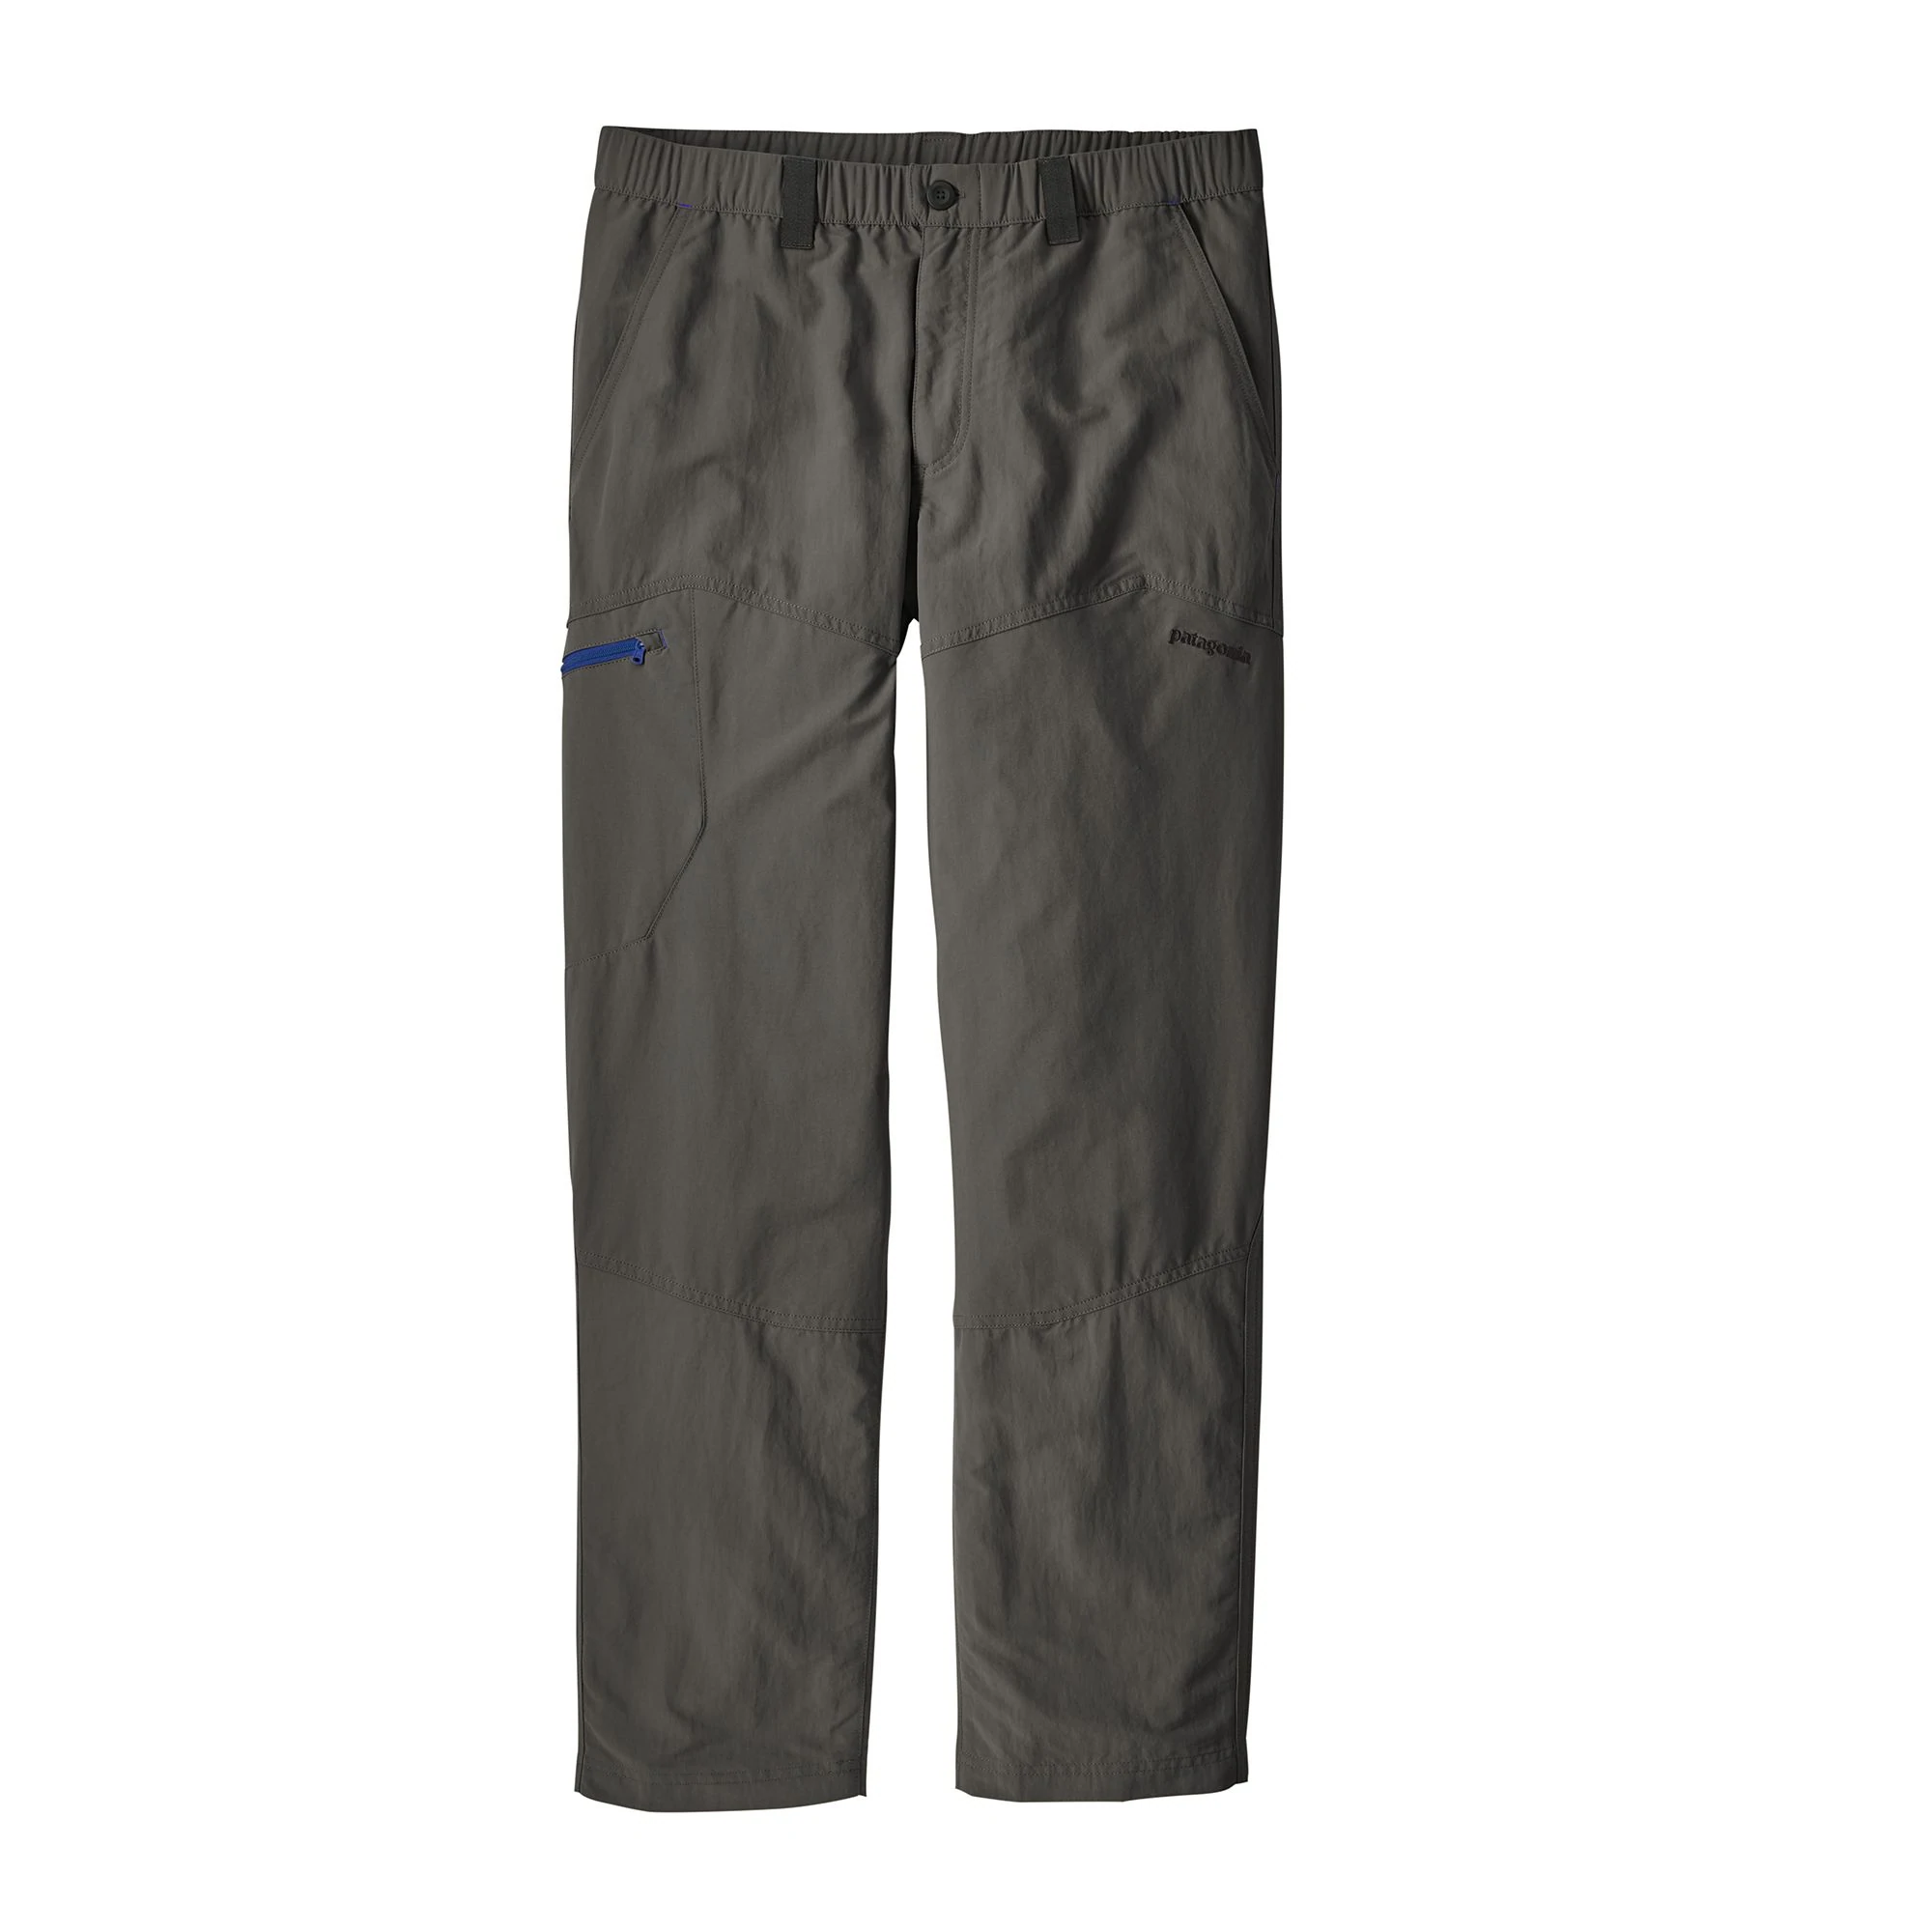 Patagonia Men's Guidewater II Pants (Size: Extra Small)